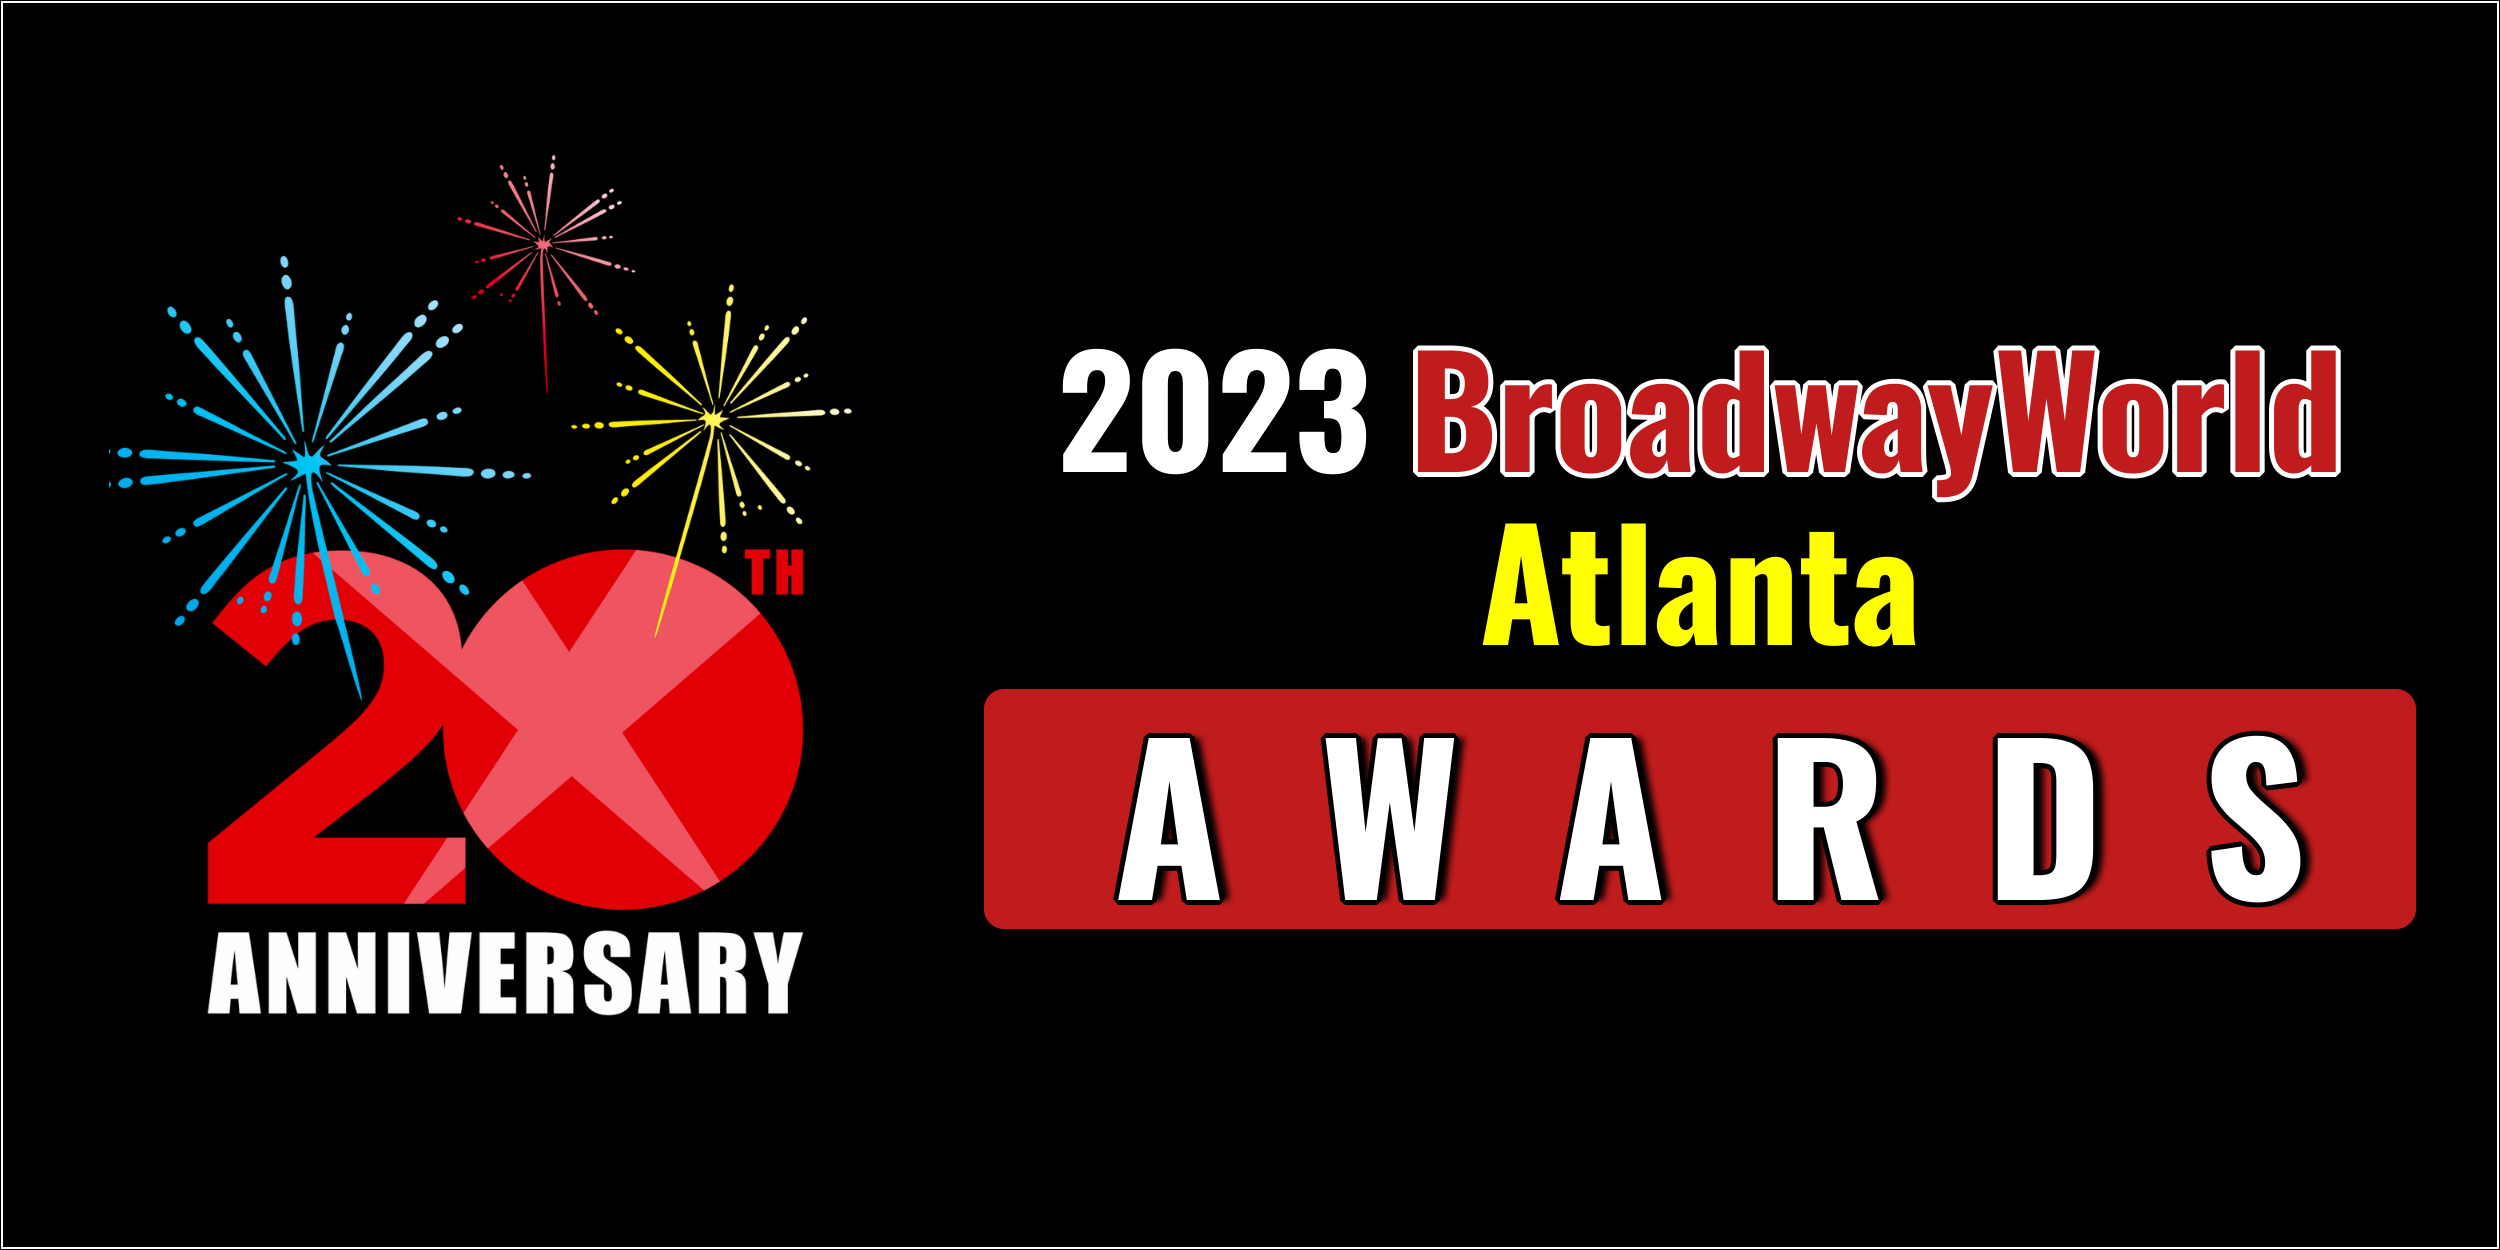 Latest Standings Announced For The 2023 BroadwayWorld Atlanta Awards;  Leads Favorite Local Theatre! 